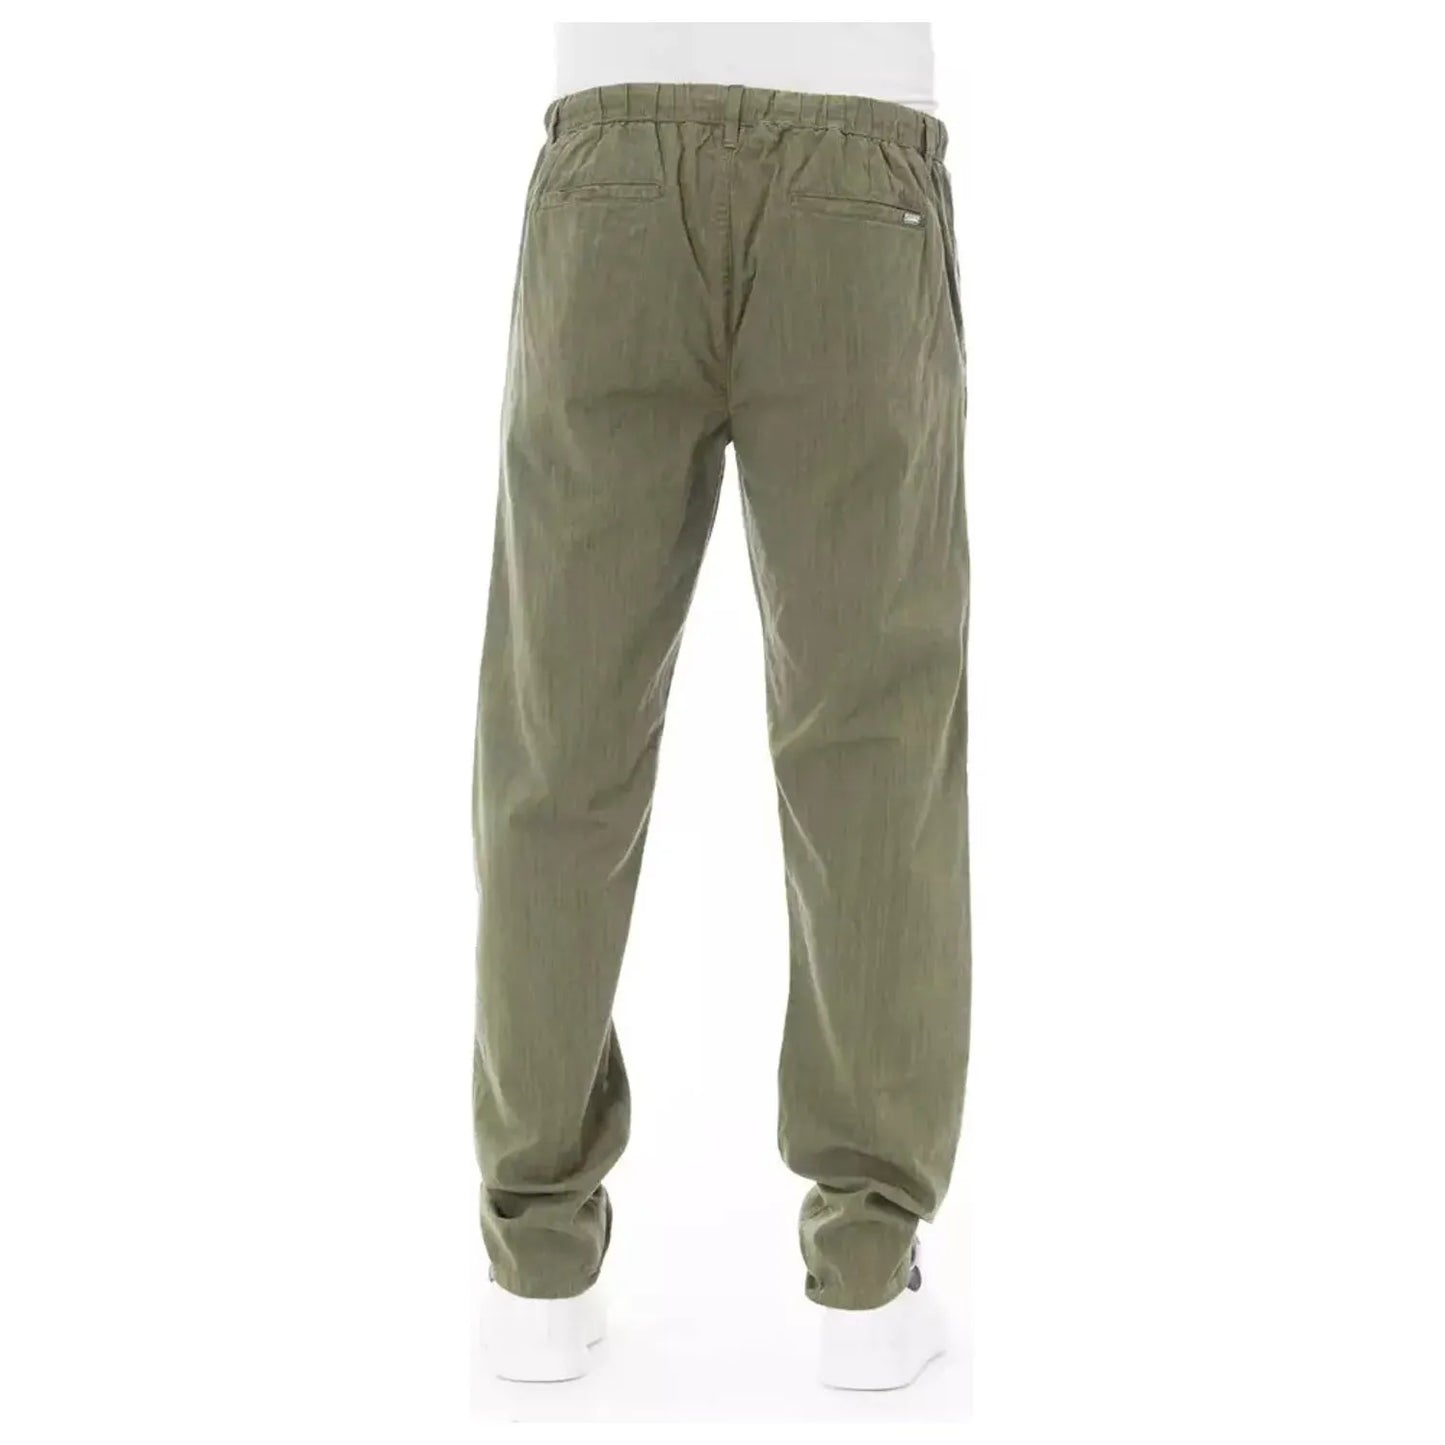 Baldinini Trend Elegant Cotton Chino Trousers in Army Green army-cotton-jeans-pant-2